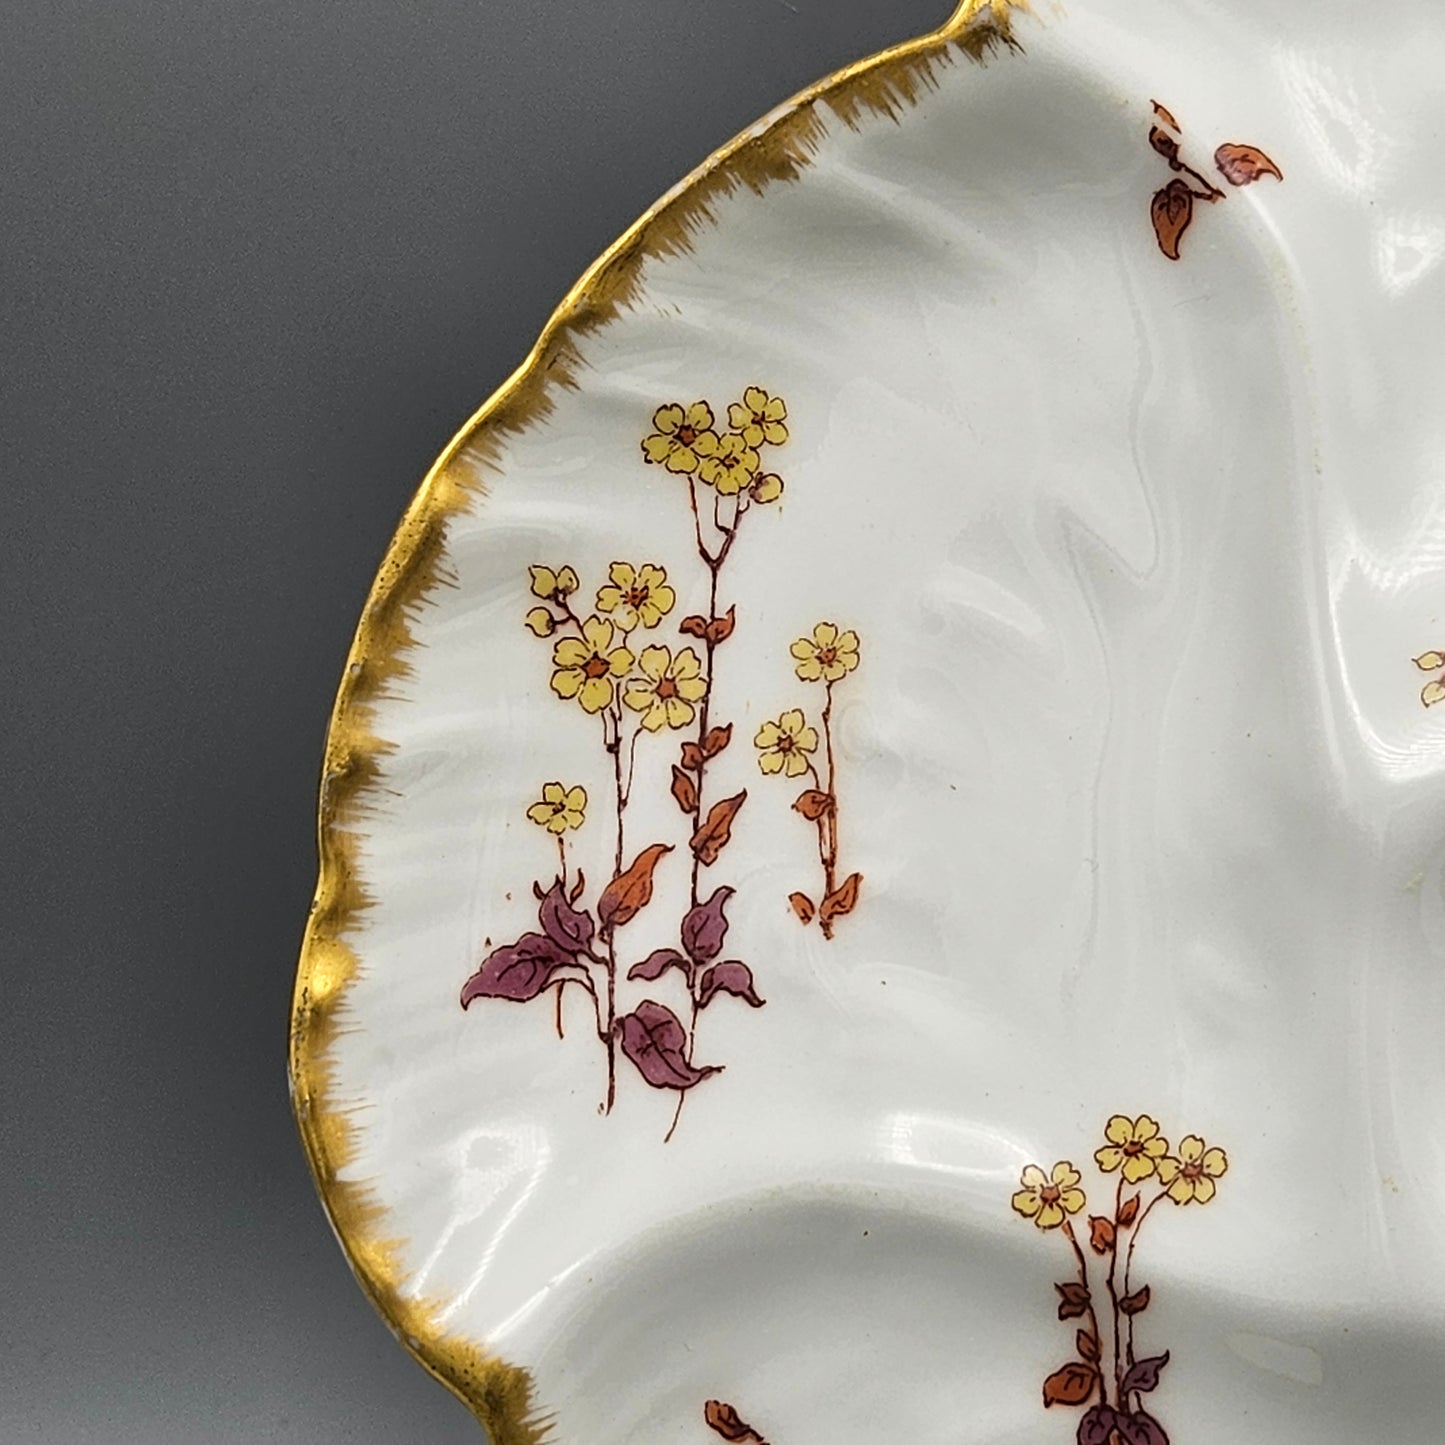 Charles Haviland Limoges Porcelain Oyster Plate with Small Flowers